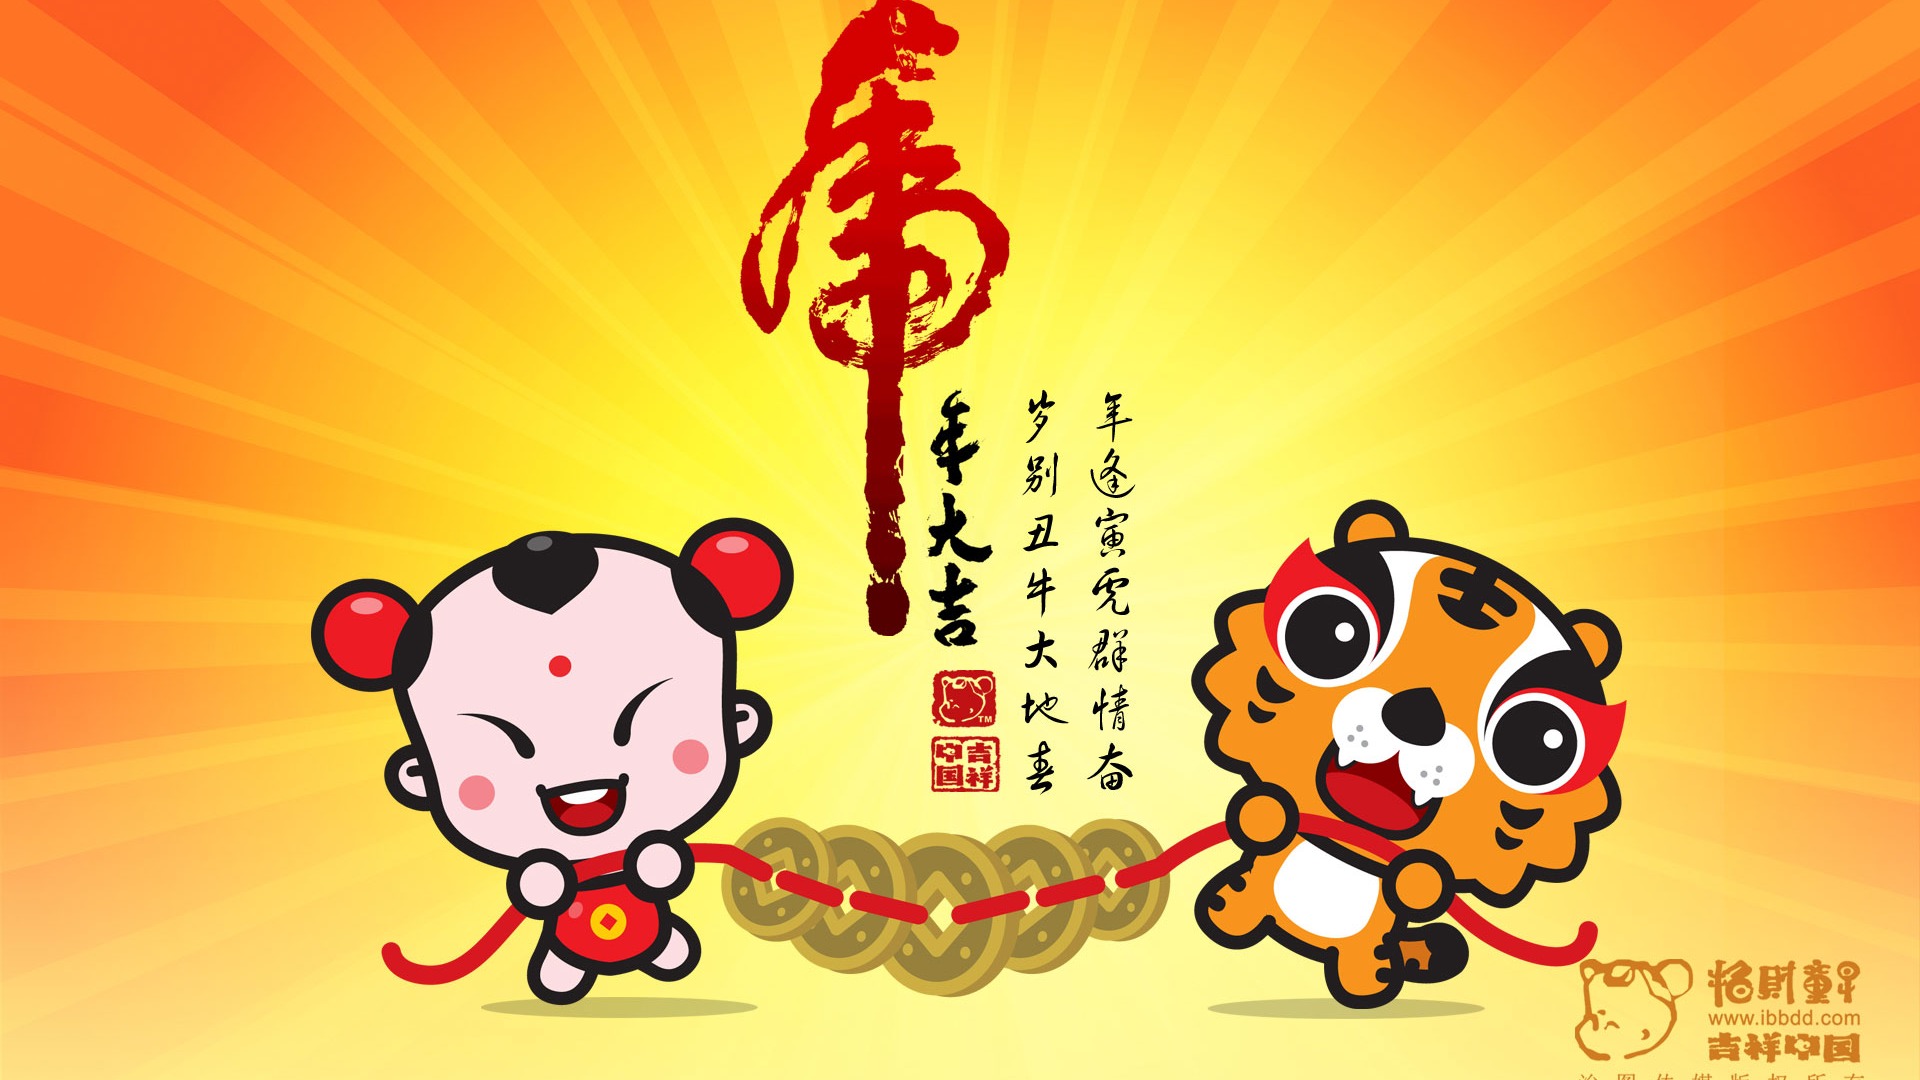 Lucky Boy Year of the Tiger Wallpaper #19 - 1920x1080